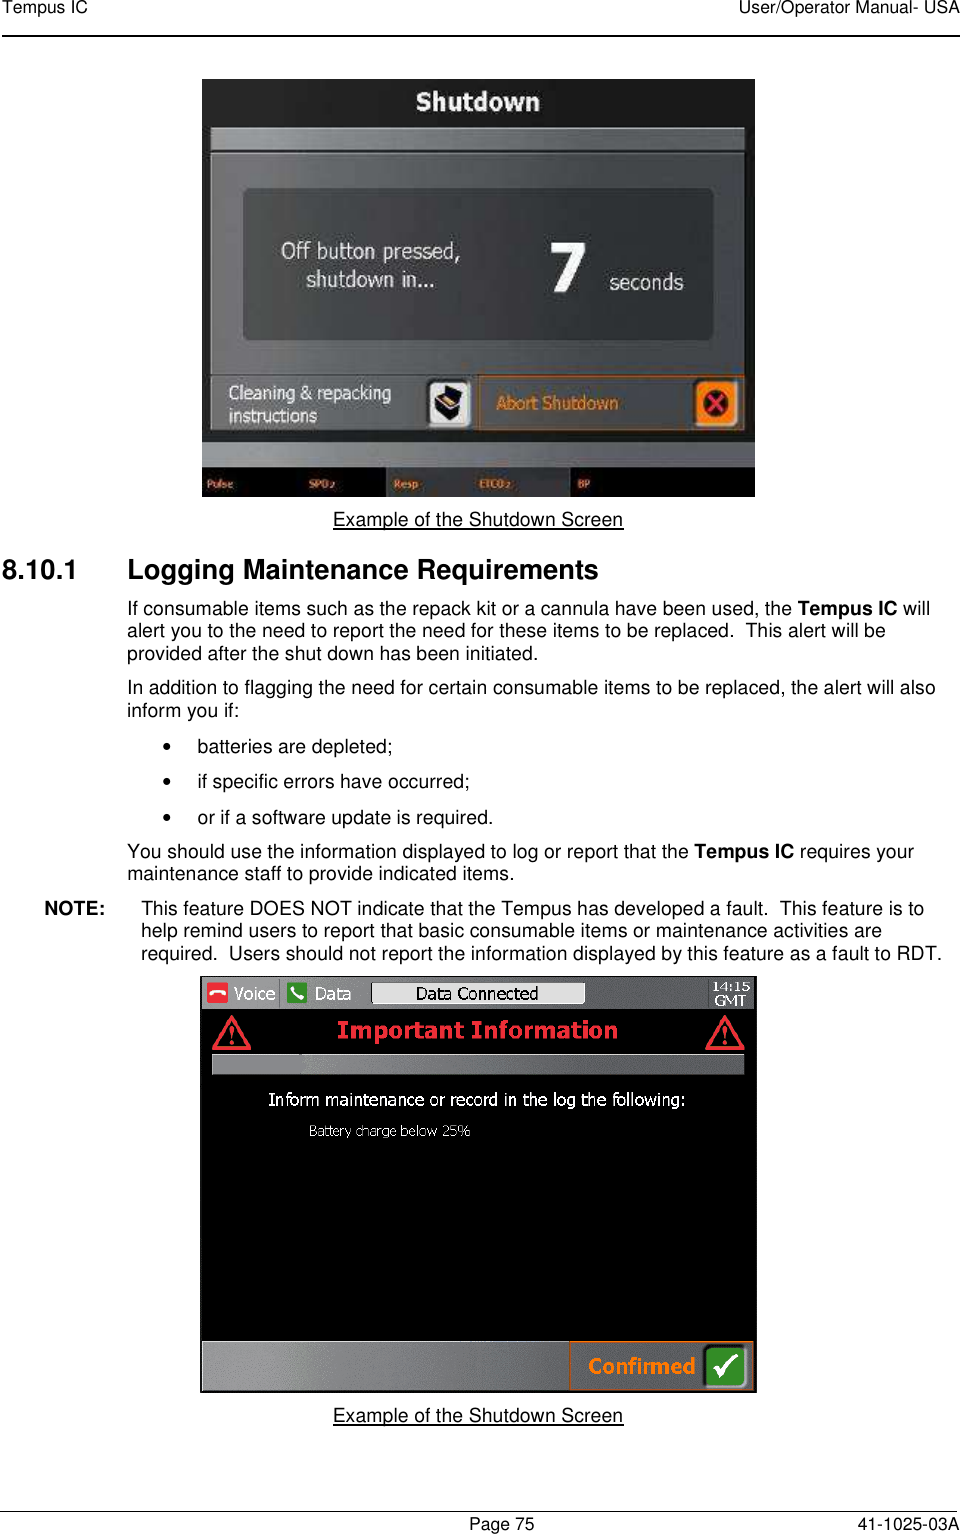 Tempus IC    User/Operator Manual- USA        Page 75   41-1025-03A  Example of the Shutdown Screen 8.10.1  Logging Maintenance Requirements If consumable items such as the repack kit or a cannula have been used, the Tempus IC will alert you to the need to report the need for these items to be replaced.  This alert will be provided after the shut down has been initiated. In addition to flagging the need for certain consumable items to be replaced, the alert will also inform you if: •  batteries are depleted; •  if specific errors have occurred; •  or if a software update is required. You should use the information displayed to log or report that the Tempus IC requires your maintenance staff to provide indicated items. NOTE:  This feature DOES NOT indicate that the Tempus has developed a fault.  This feature is to help remind users to report that basic consumable items or maintenance activities are required.  Users should not report the information displayed by this feature as a fault to RDT.  Example of the Shutdown Screen  